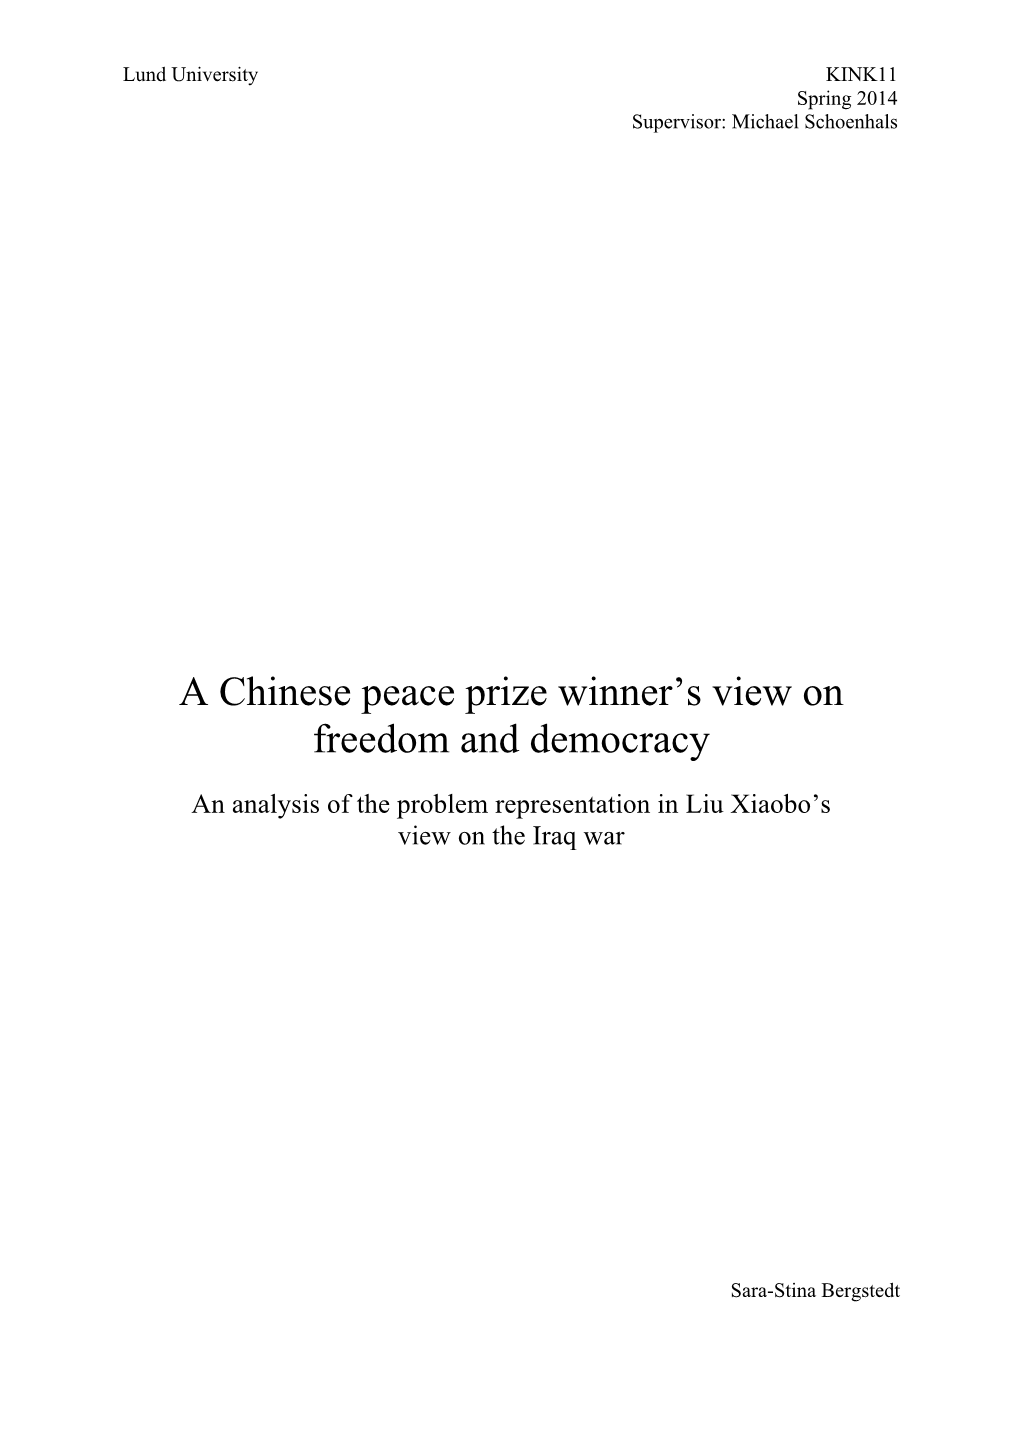 A Chinese Peace Prize Winner's View on Freedom and Democracy